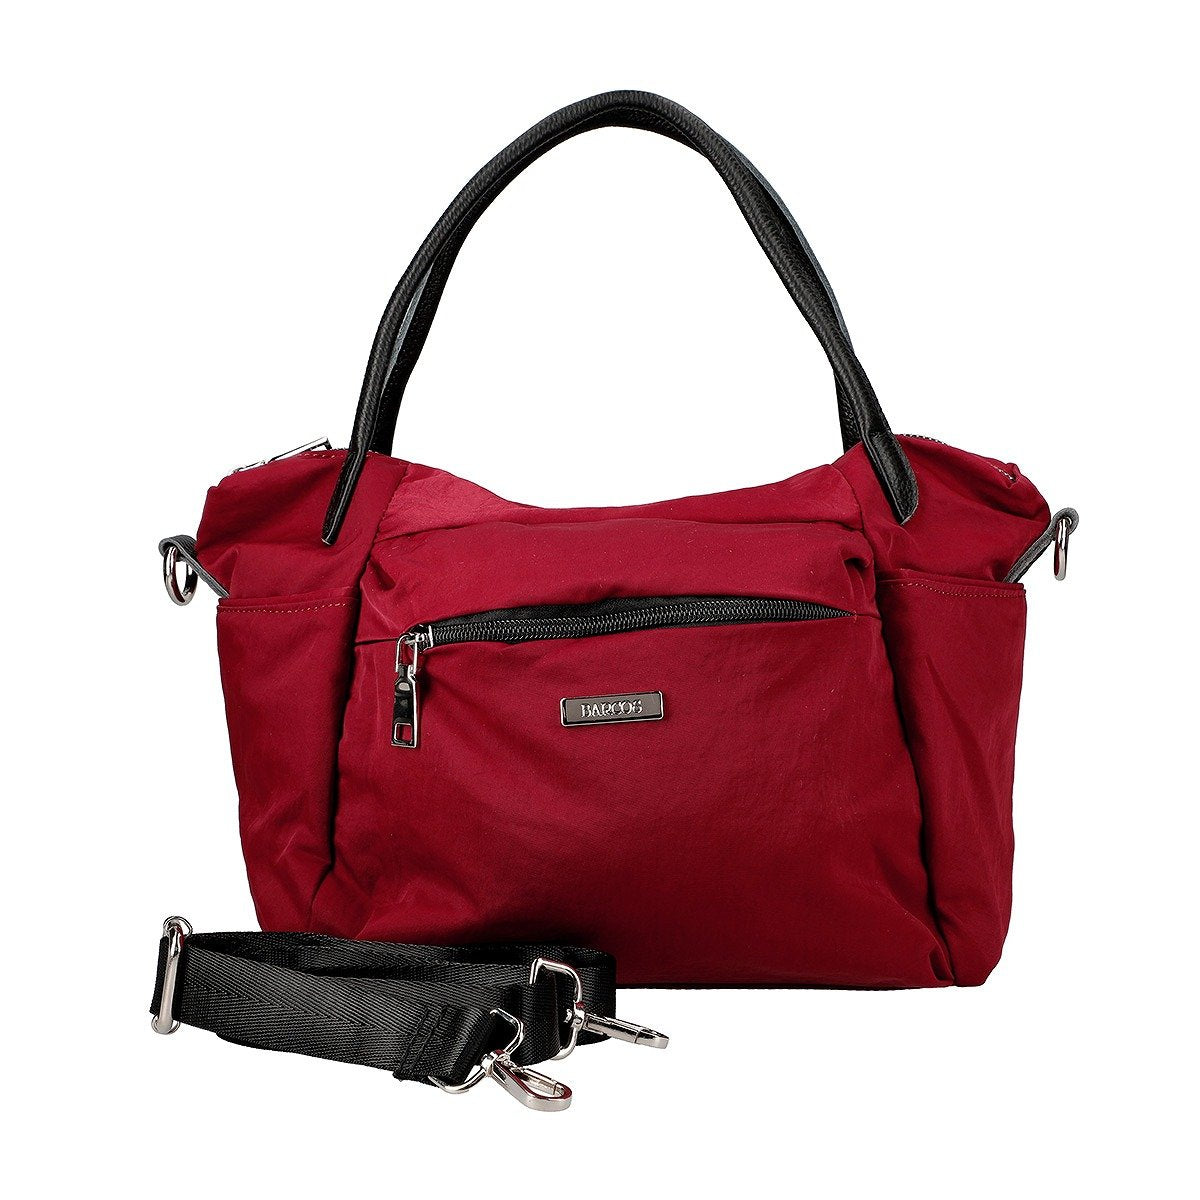 Nylon and Leather 2 Way Handbag with Metal Logo Finish and Shoulder Strap Attachment